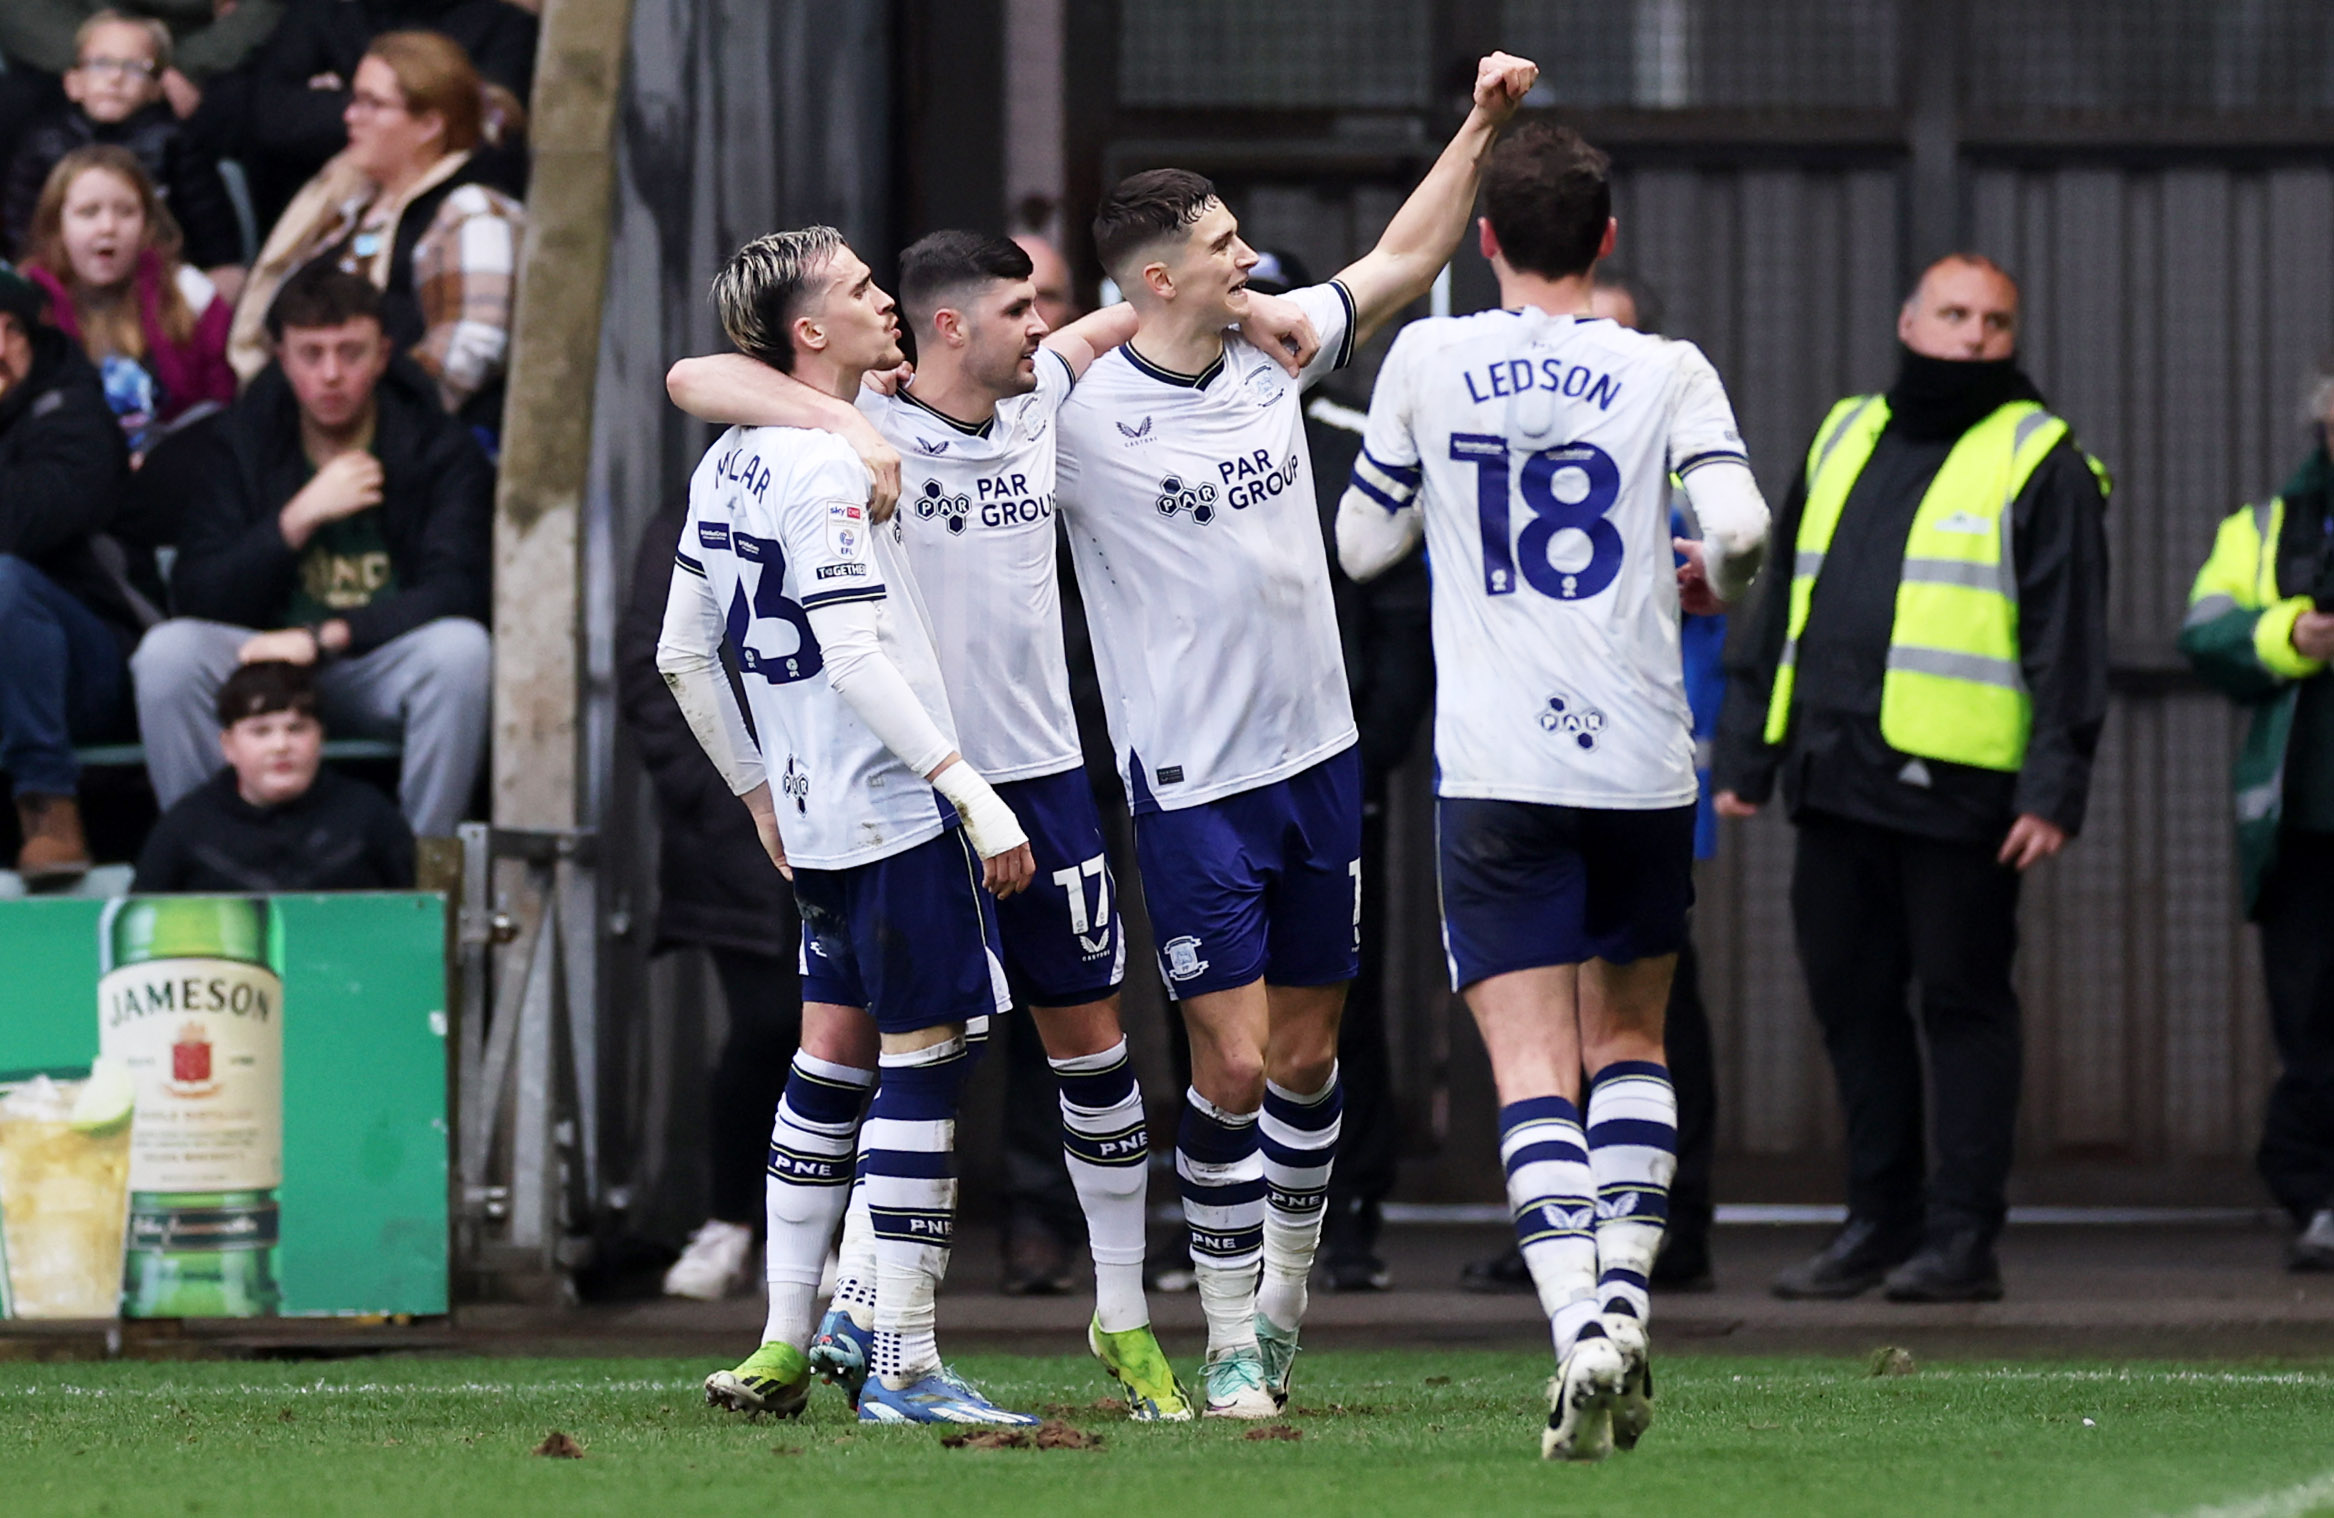 Preston North End players celebrate scoring a goal against Plymouth Argyle 